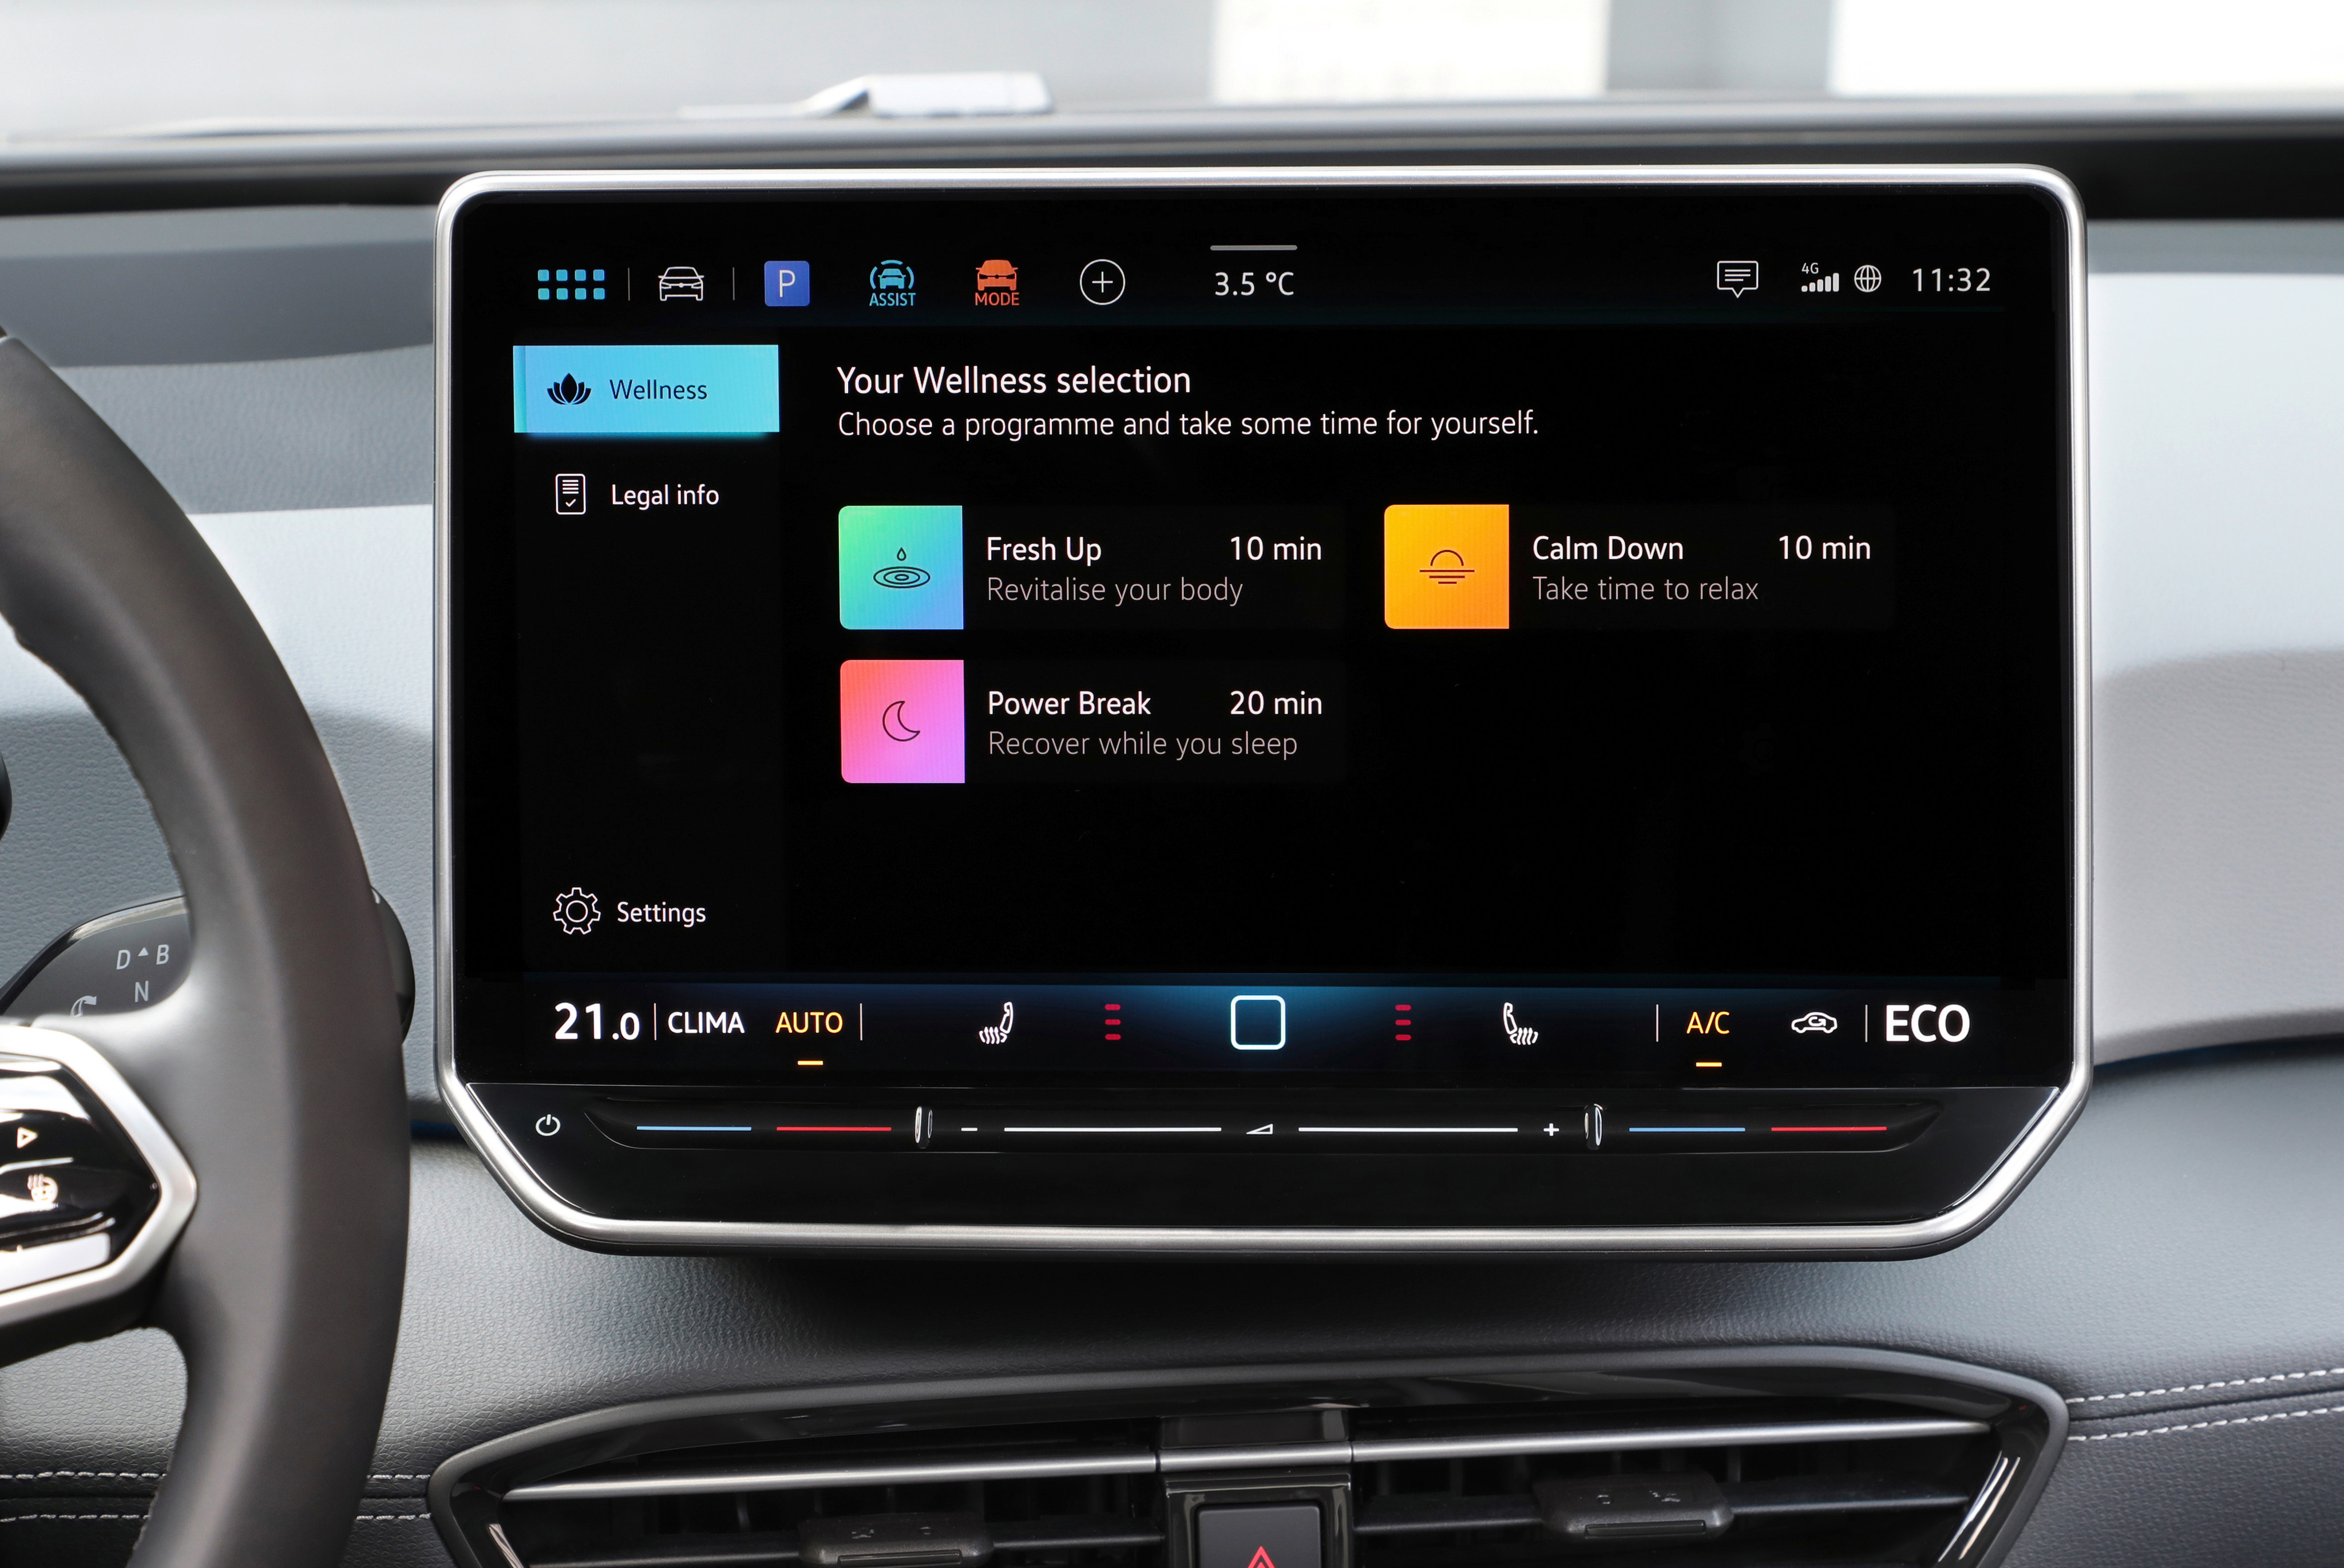 VW ID.3 gets a refresh with better infotainment and more power for the Pro S